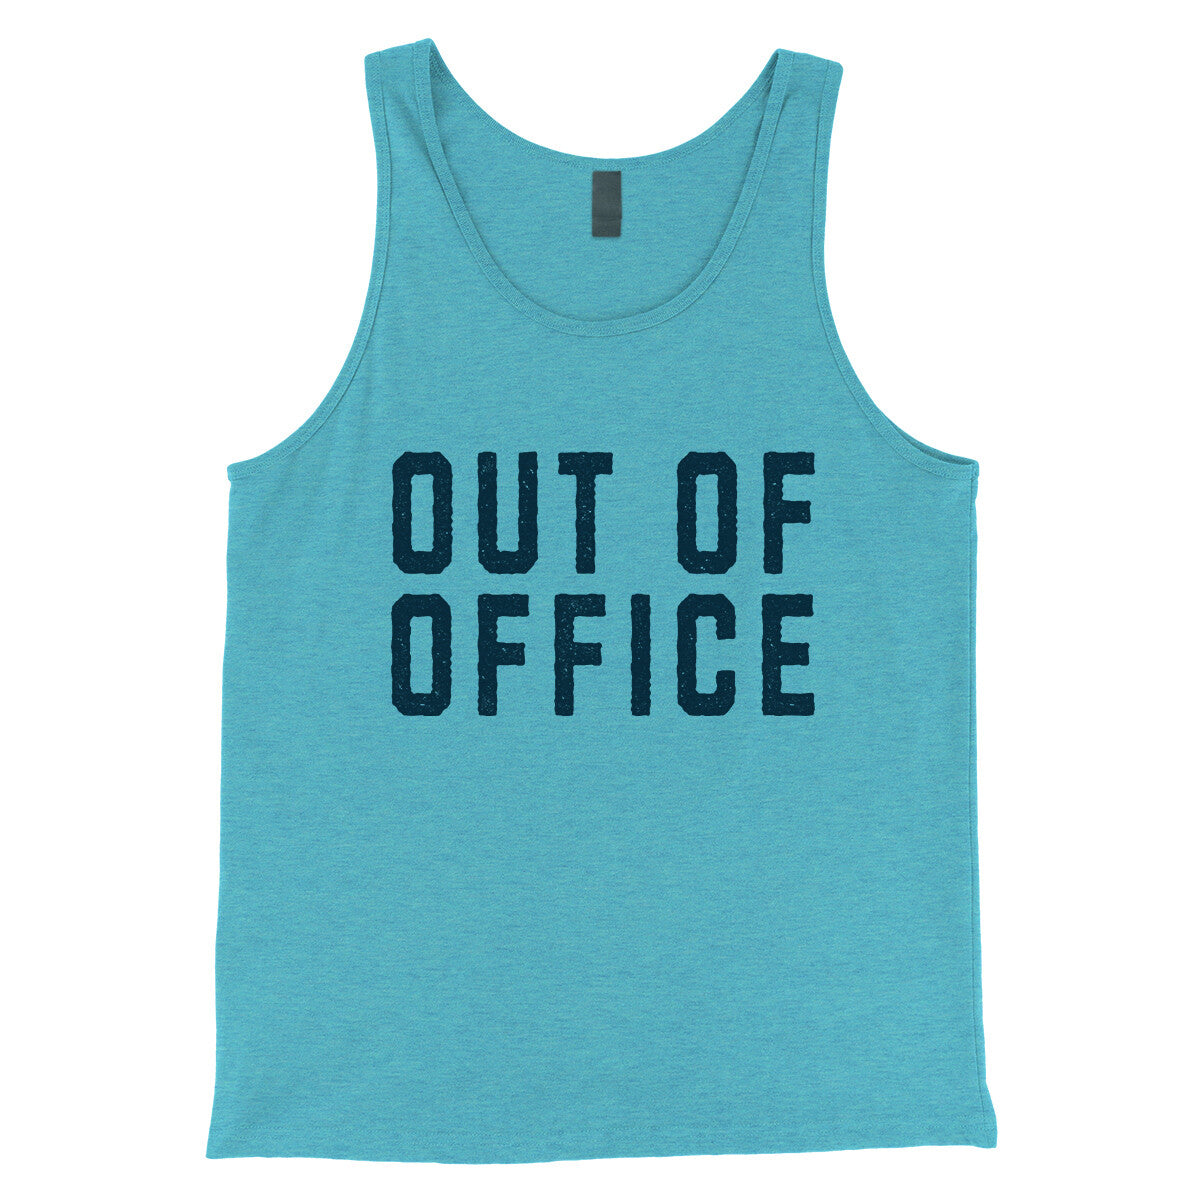 Out of Office in Aqua Triblend Color